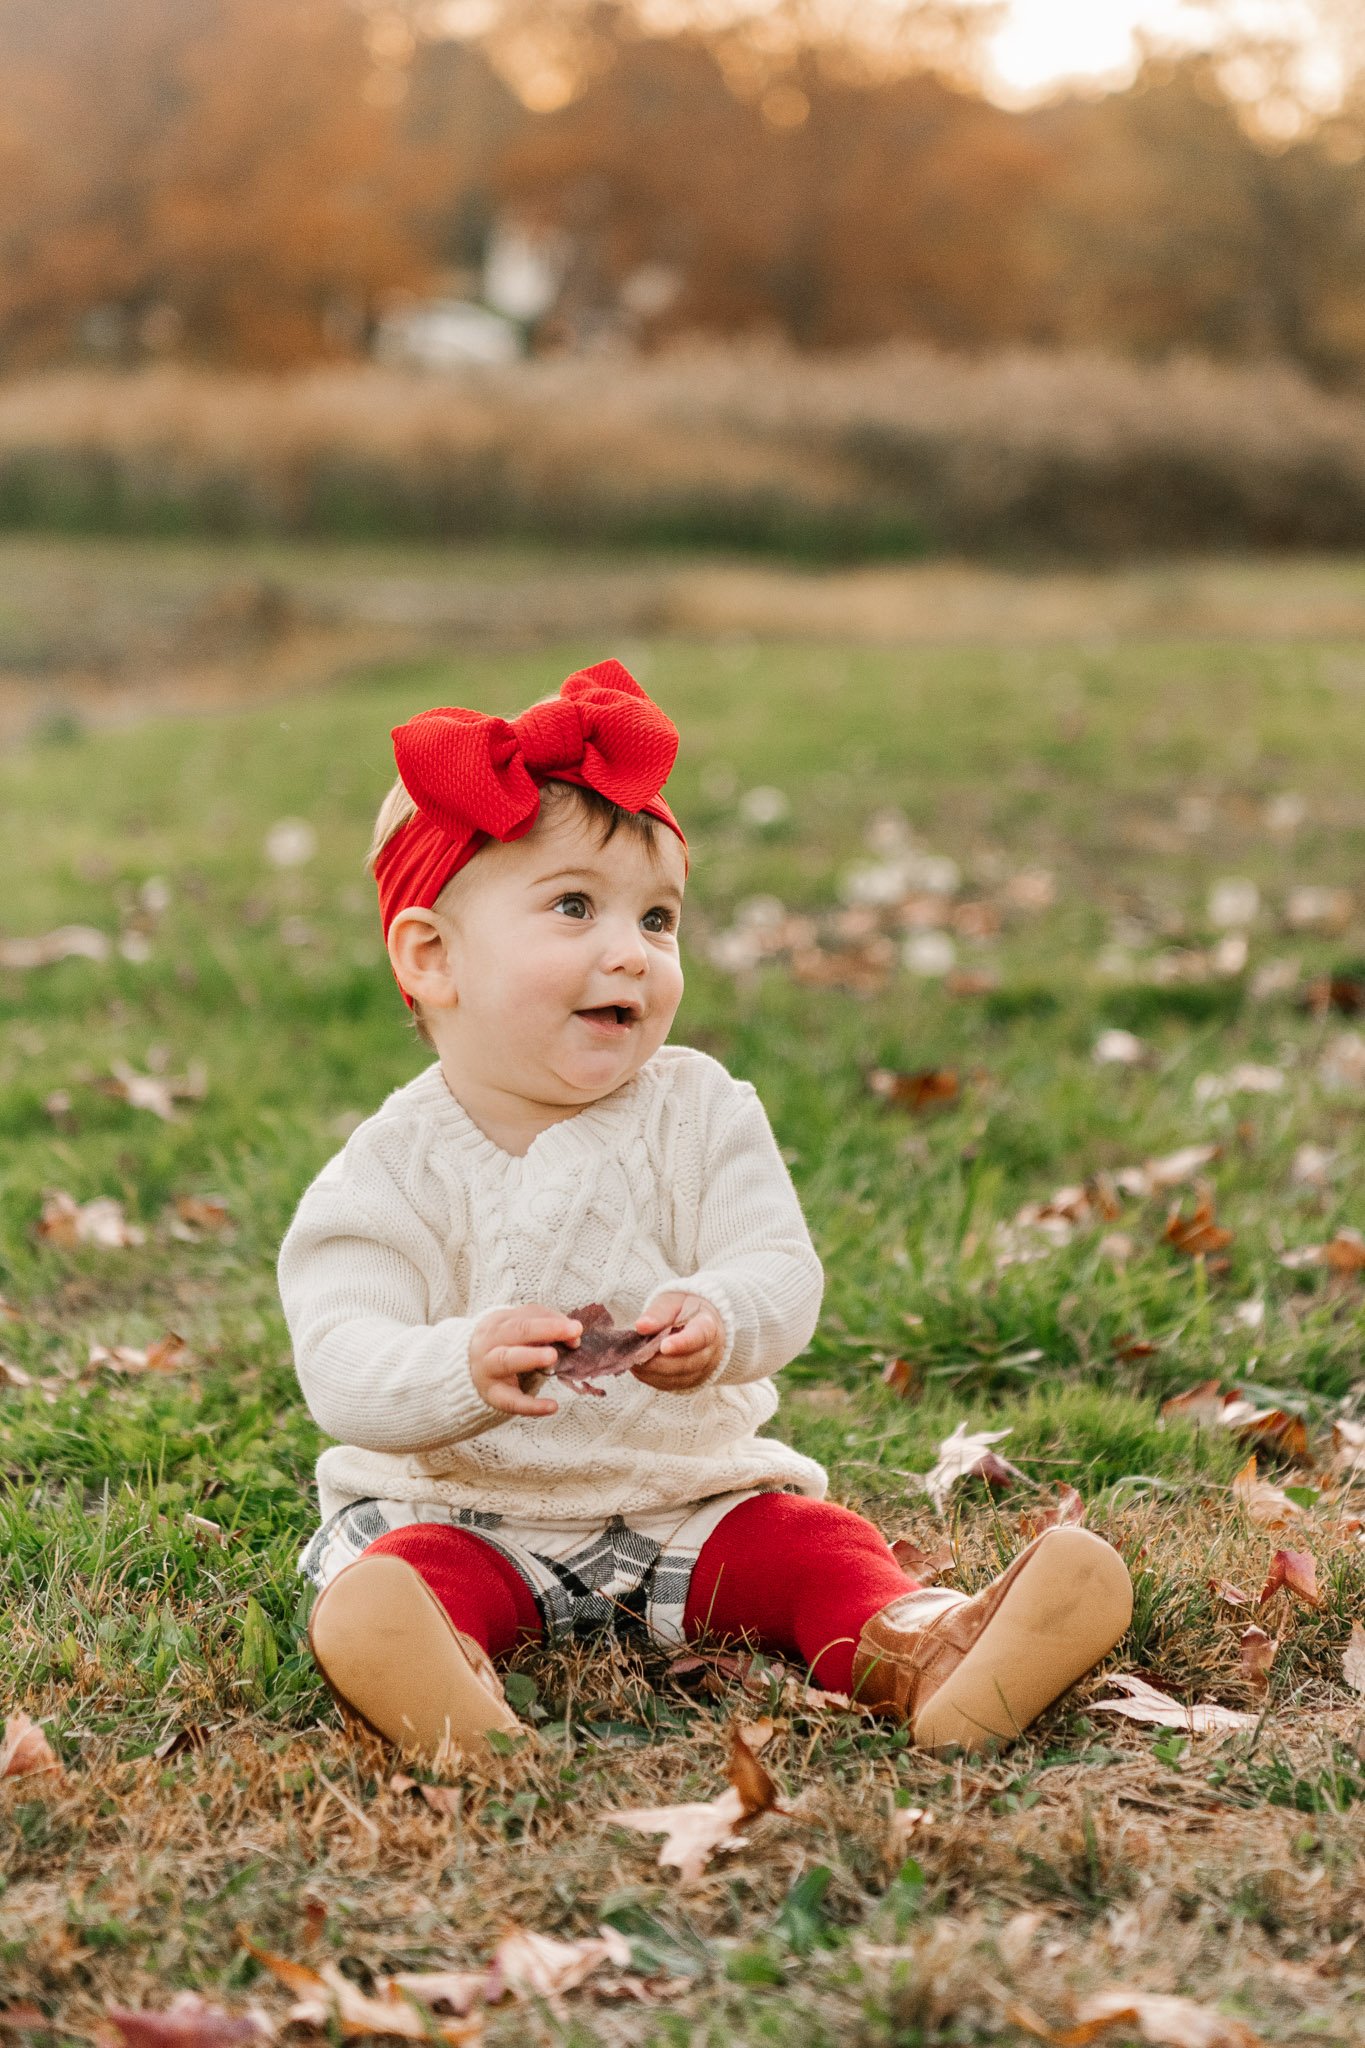  Candid toddler portrait with a little girl wearing white and red by Nicole Hawkins Photography. fall baby picture outfits #NicoleHawkinsPhotography #NicoleHawkinsFamily #fallfamilyphotos #fallphotos #familyphotographerNJ #NJfallfamilypics 